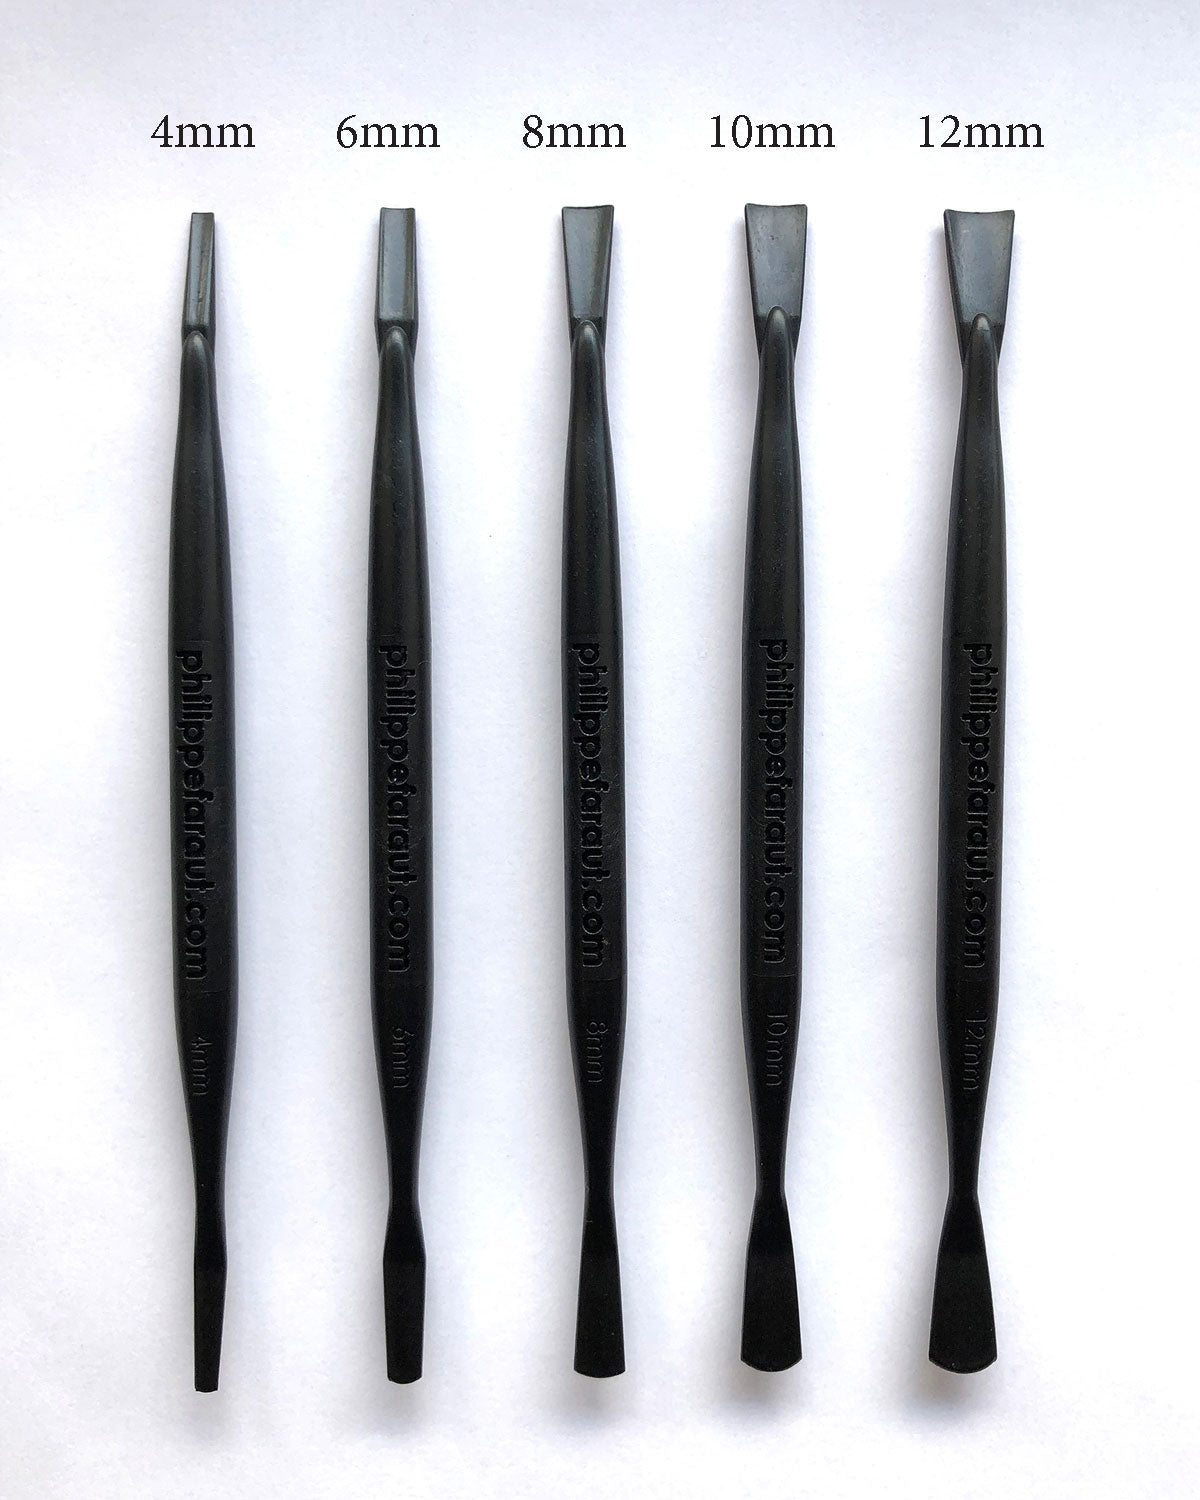 Sculpting Tools for Fingers and Hair by Faraut 